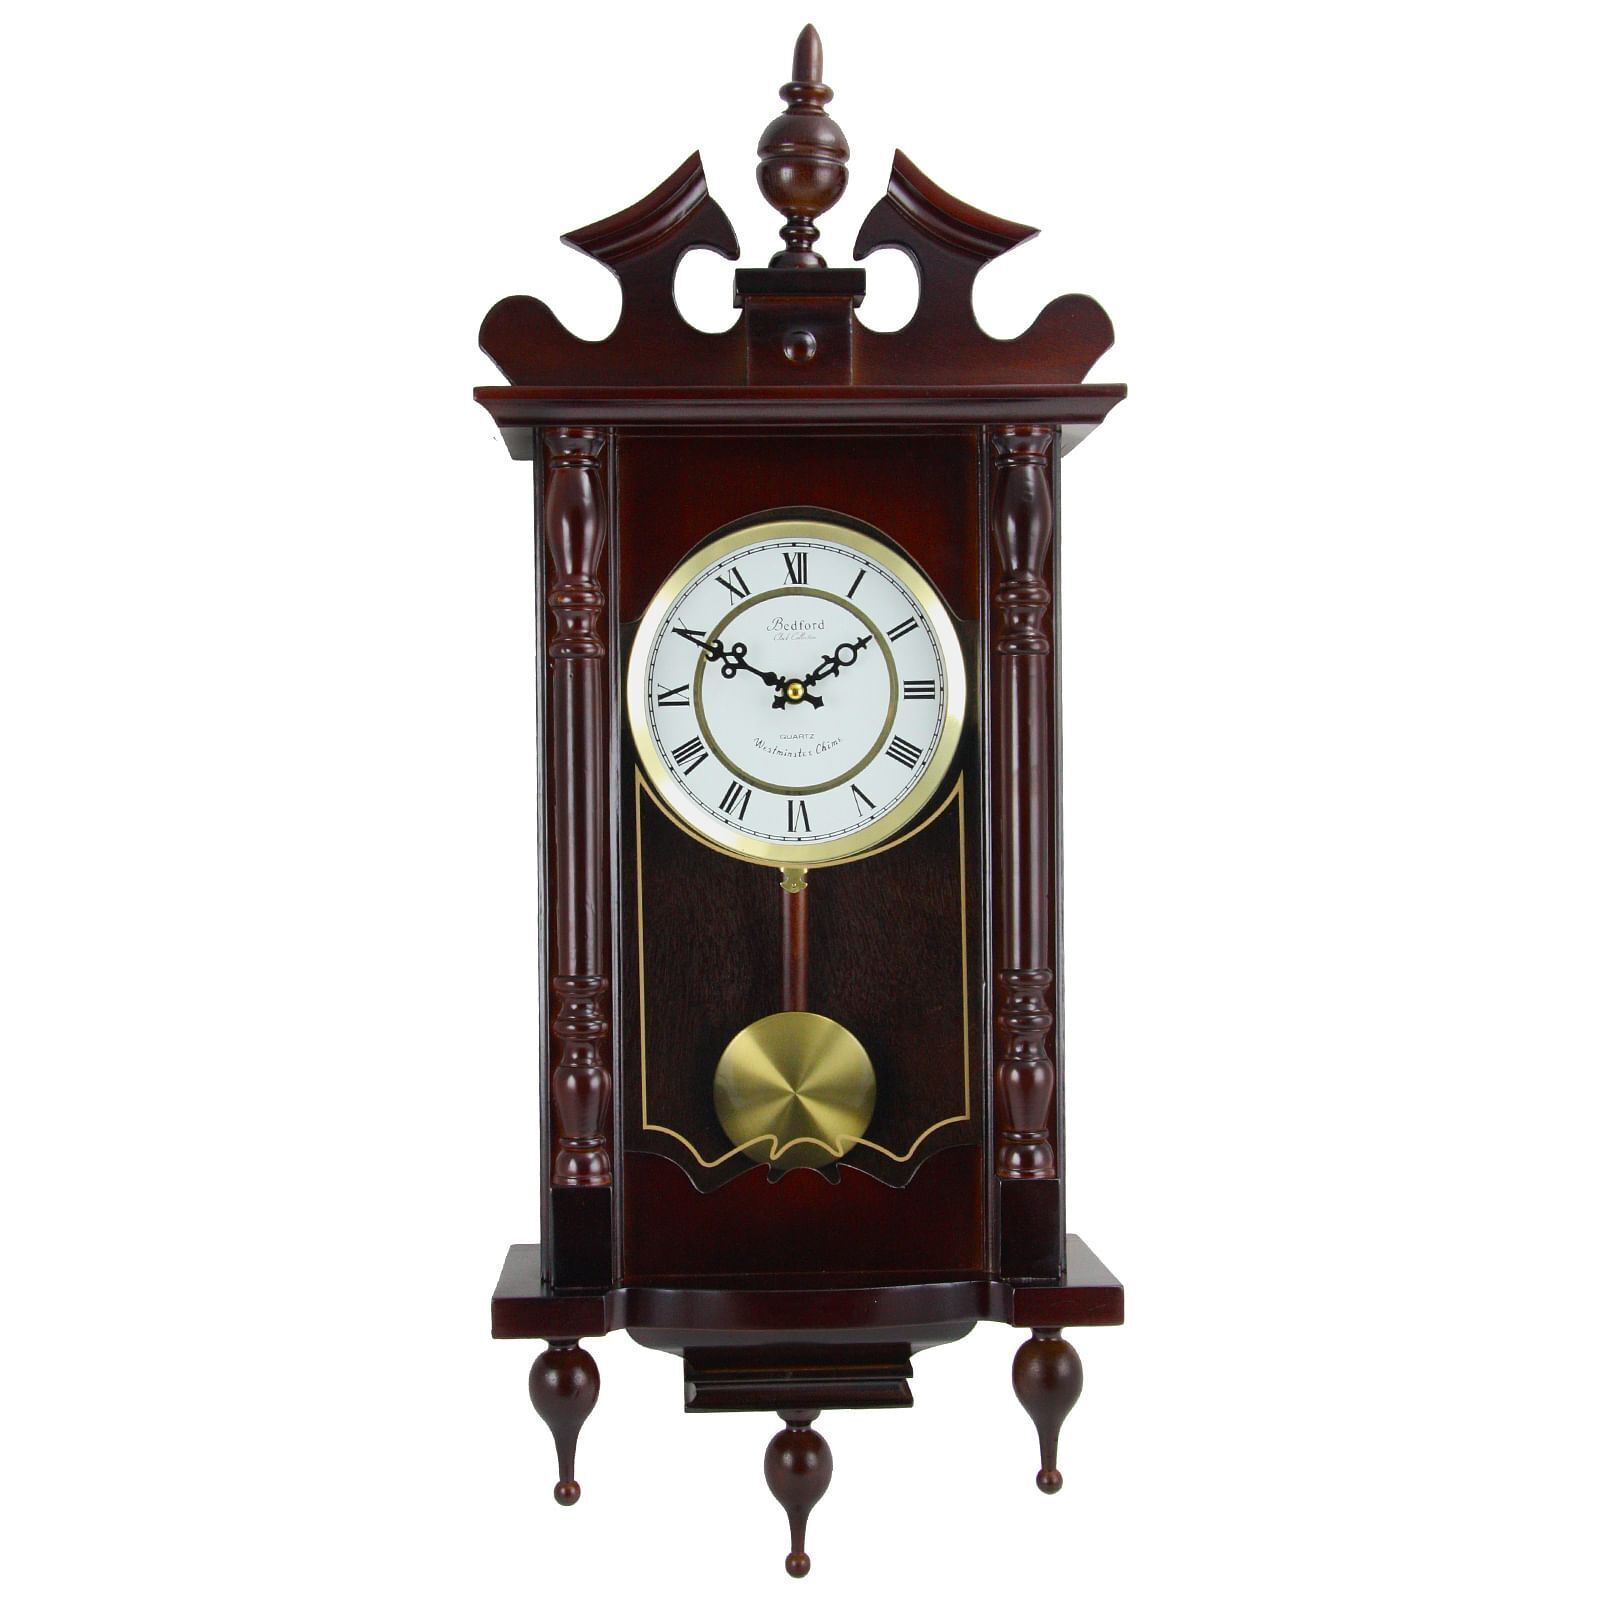 Primary image for Bedford Clock Collection Classic 31 Inch Chiming Pendulum Wall Clock in Cherry